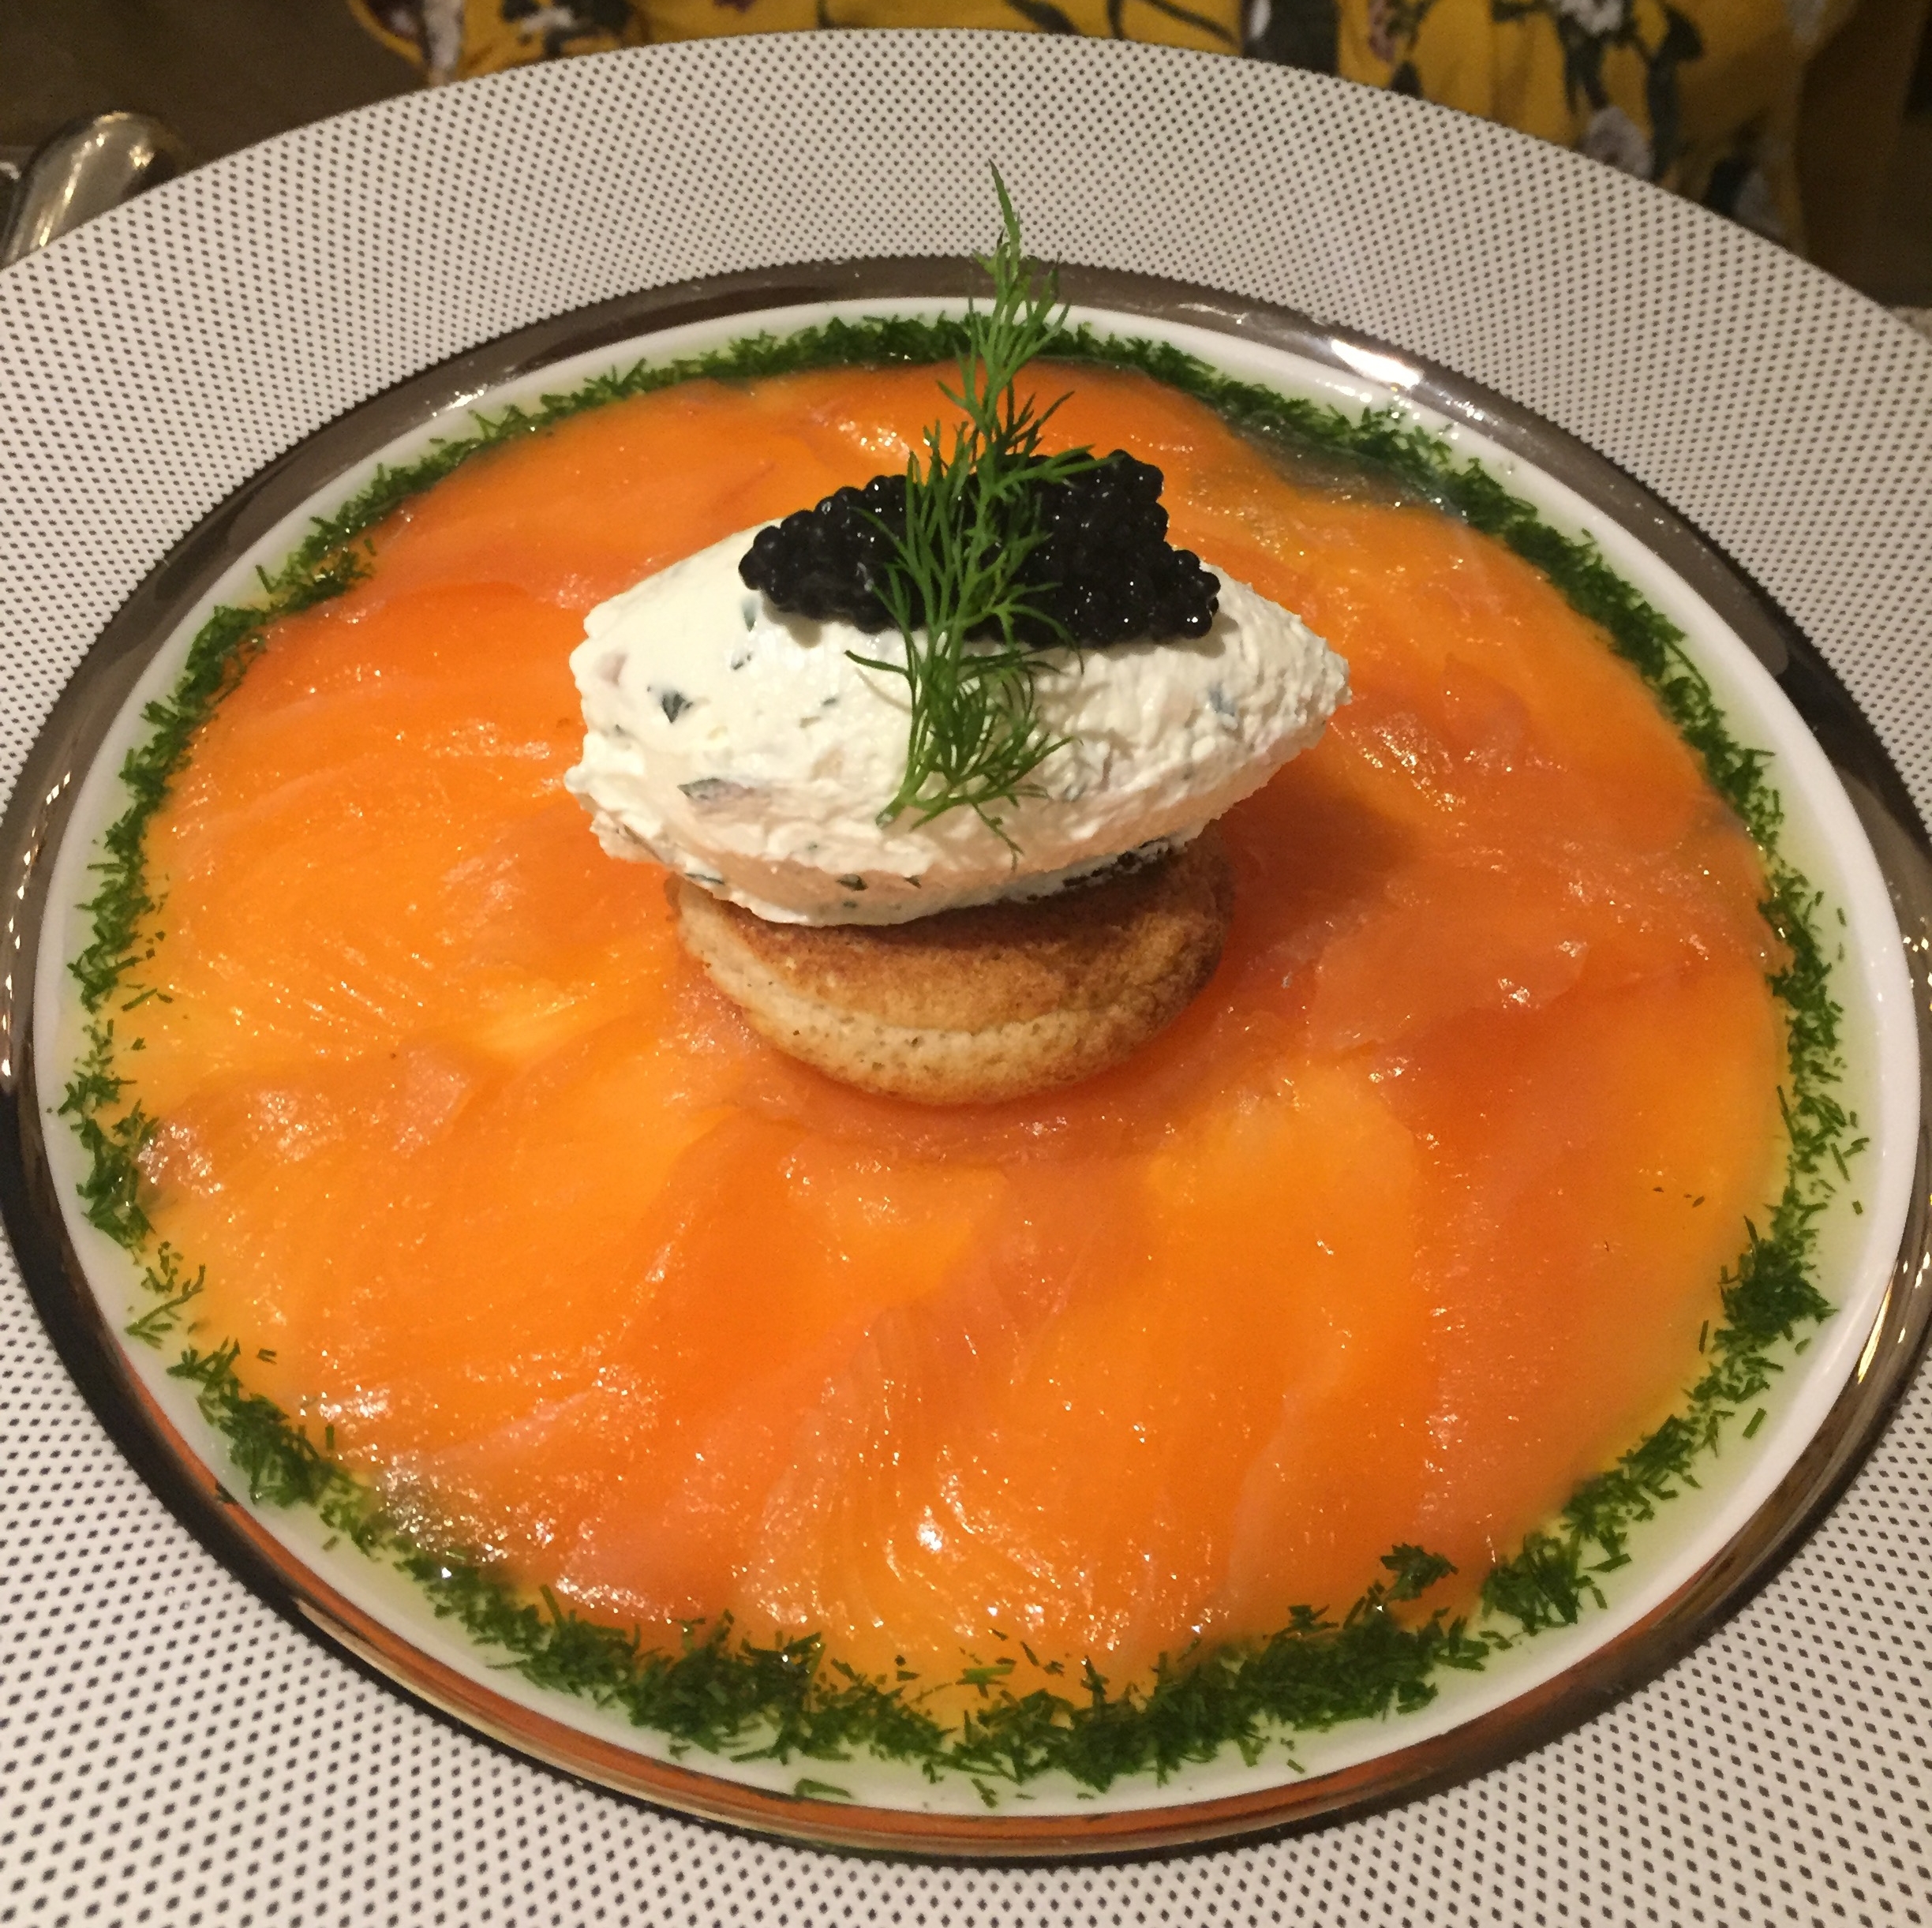 Salmon at Galvin at The Athenaeum - Review